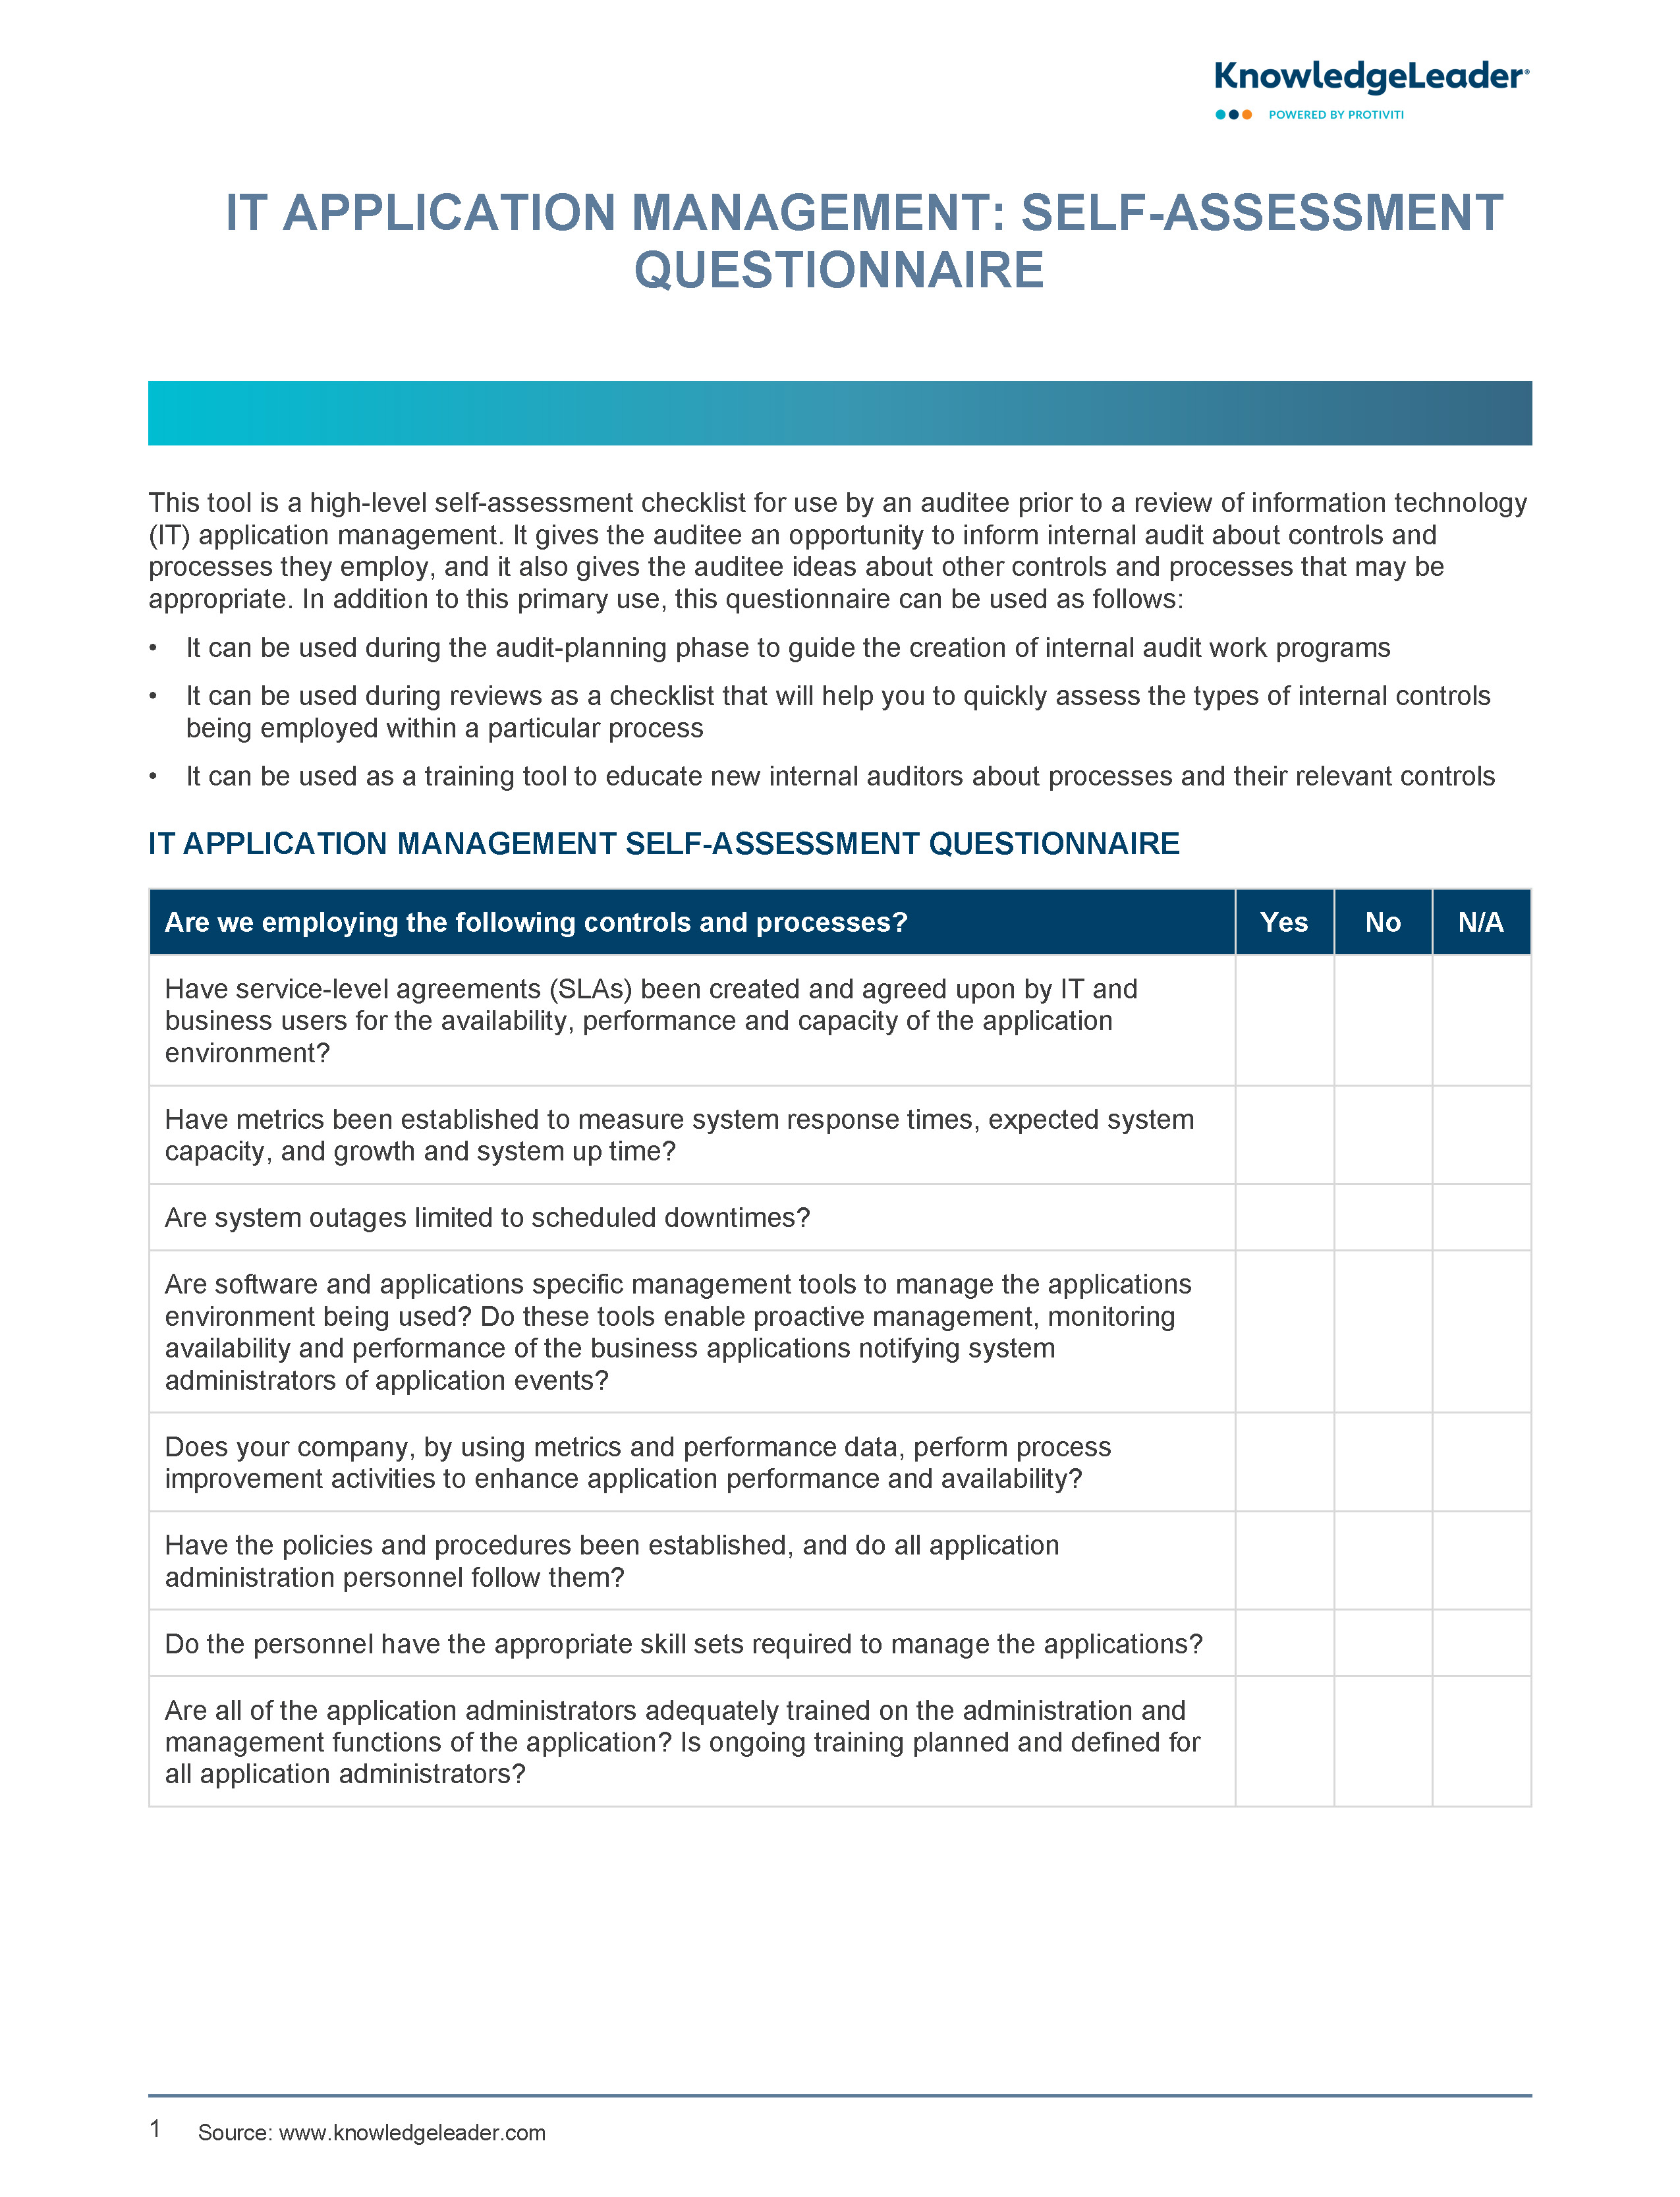 Screenshot of the first page of IT Application Management Self Assessment Questionnaire